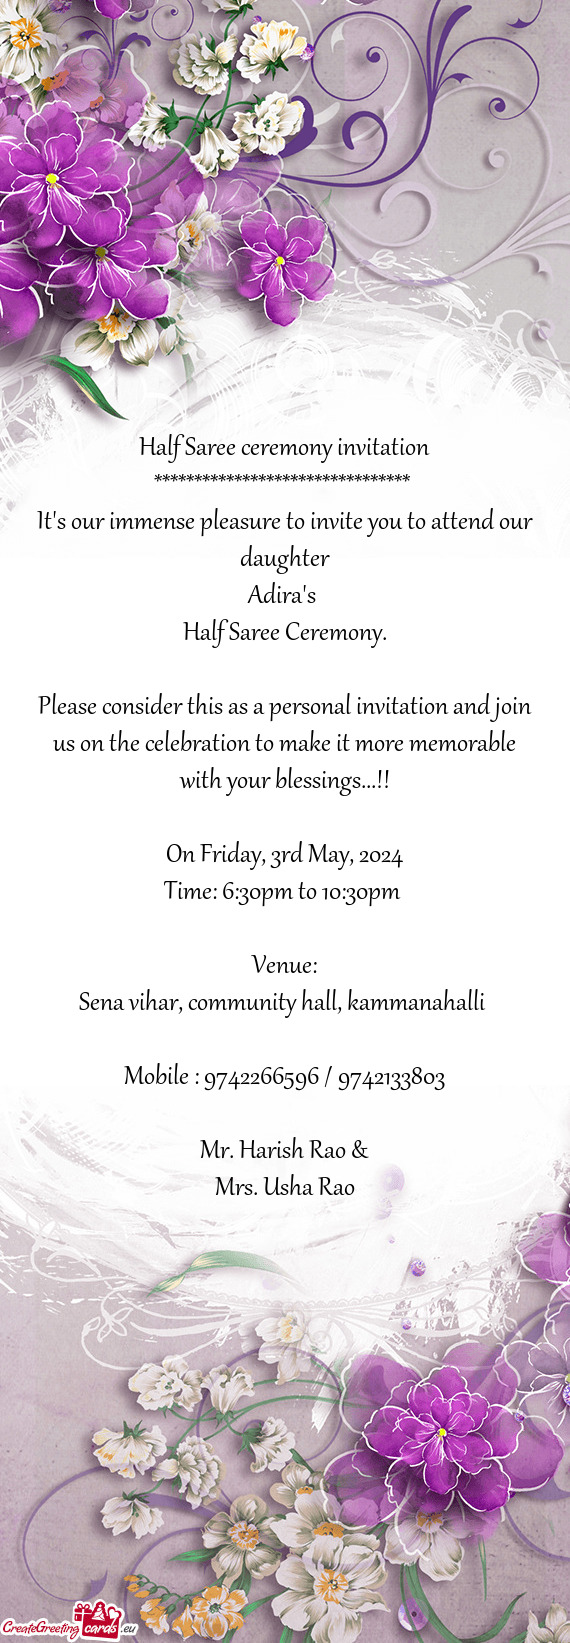 Te you to attend our daughter Adira's Half Saree Ceremony